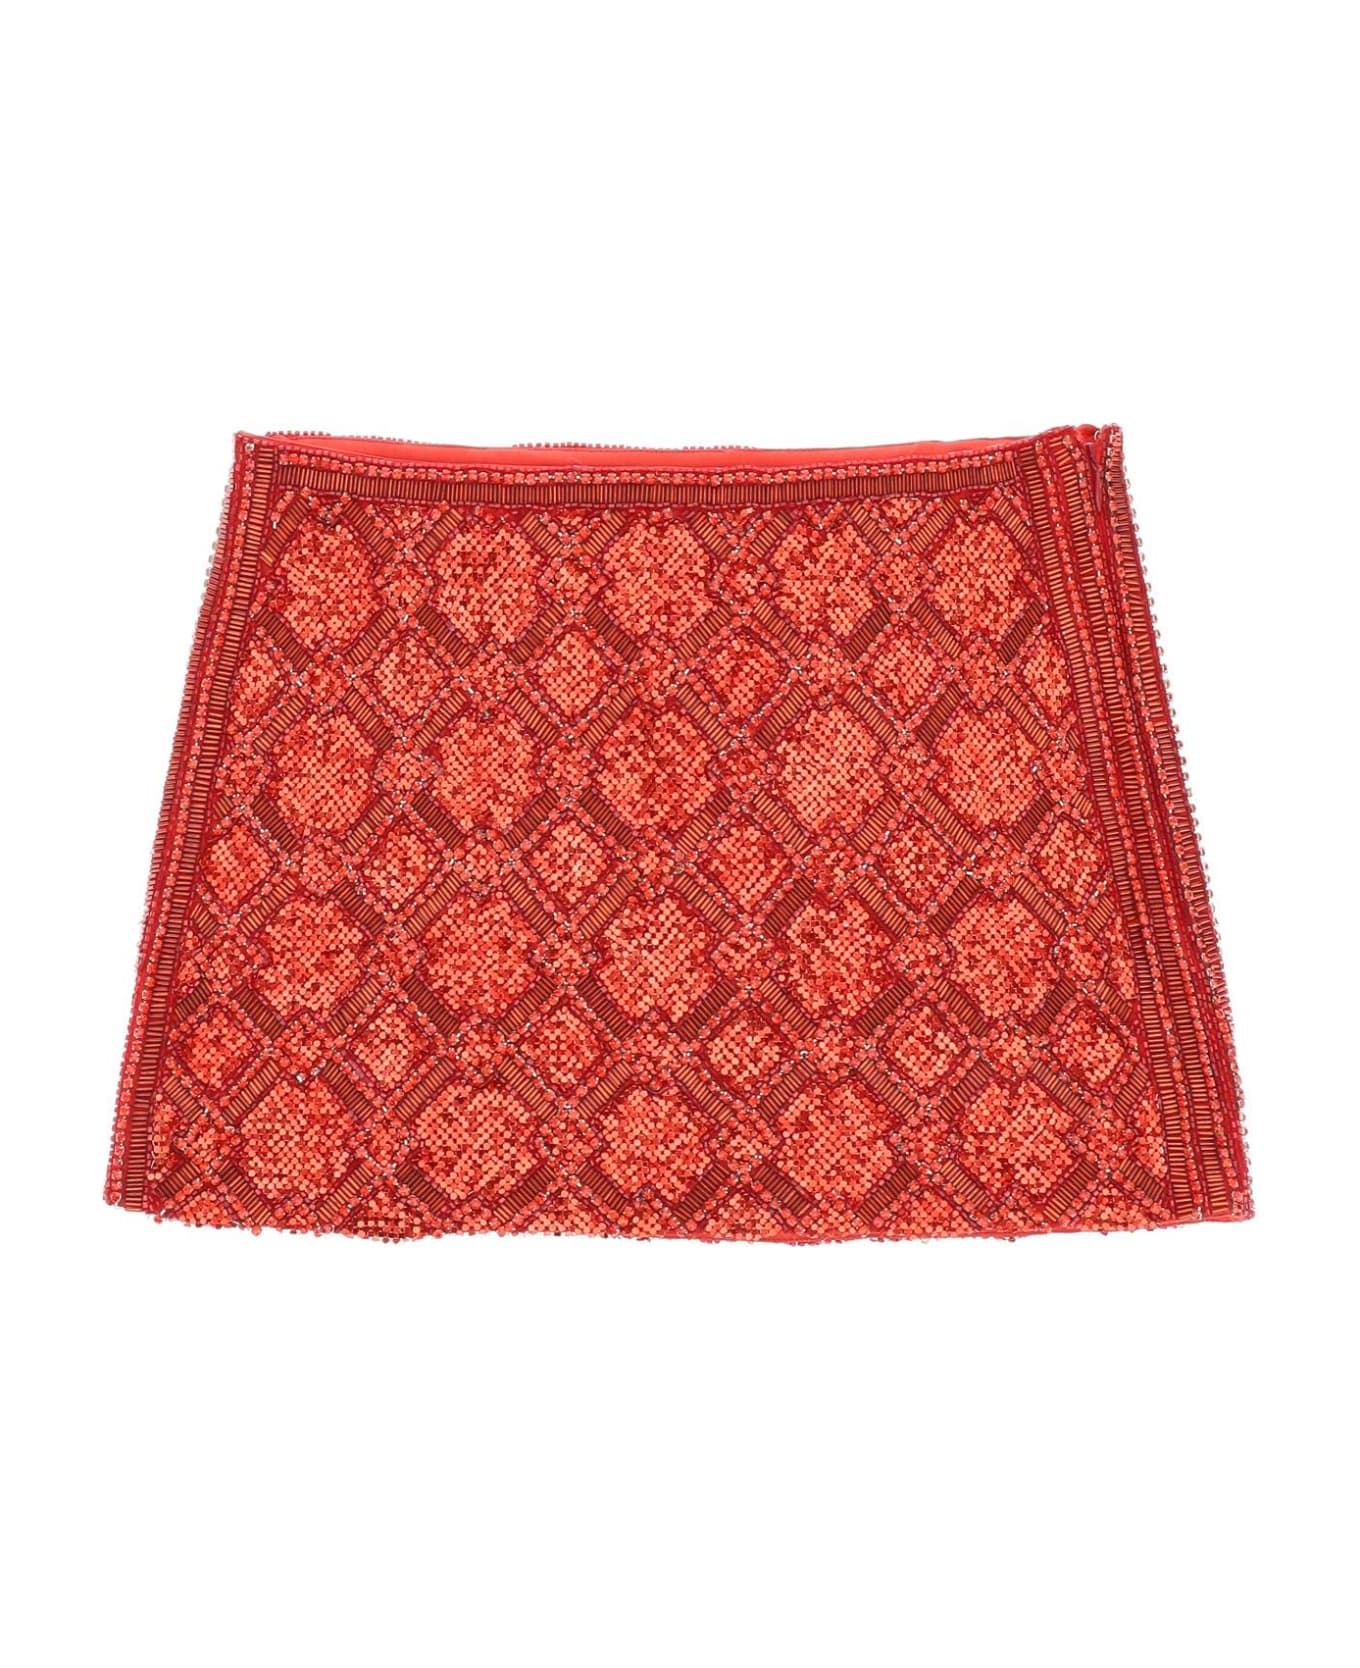 retrofete Embroidered Mini Skirt - RED (Red) スカート